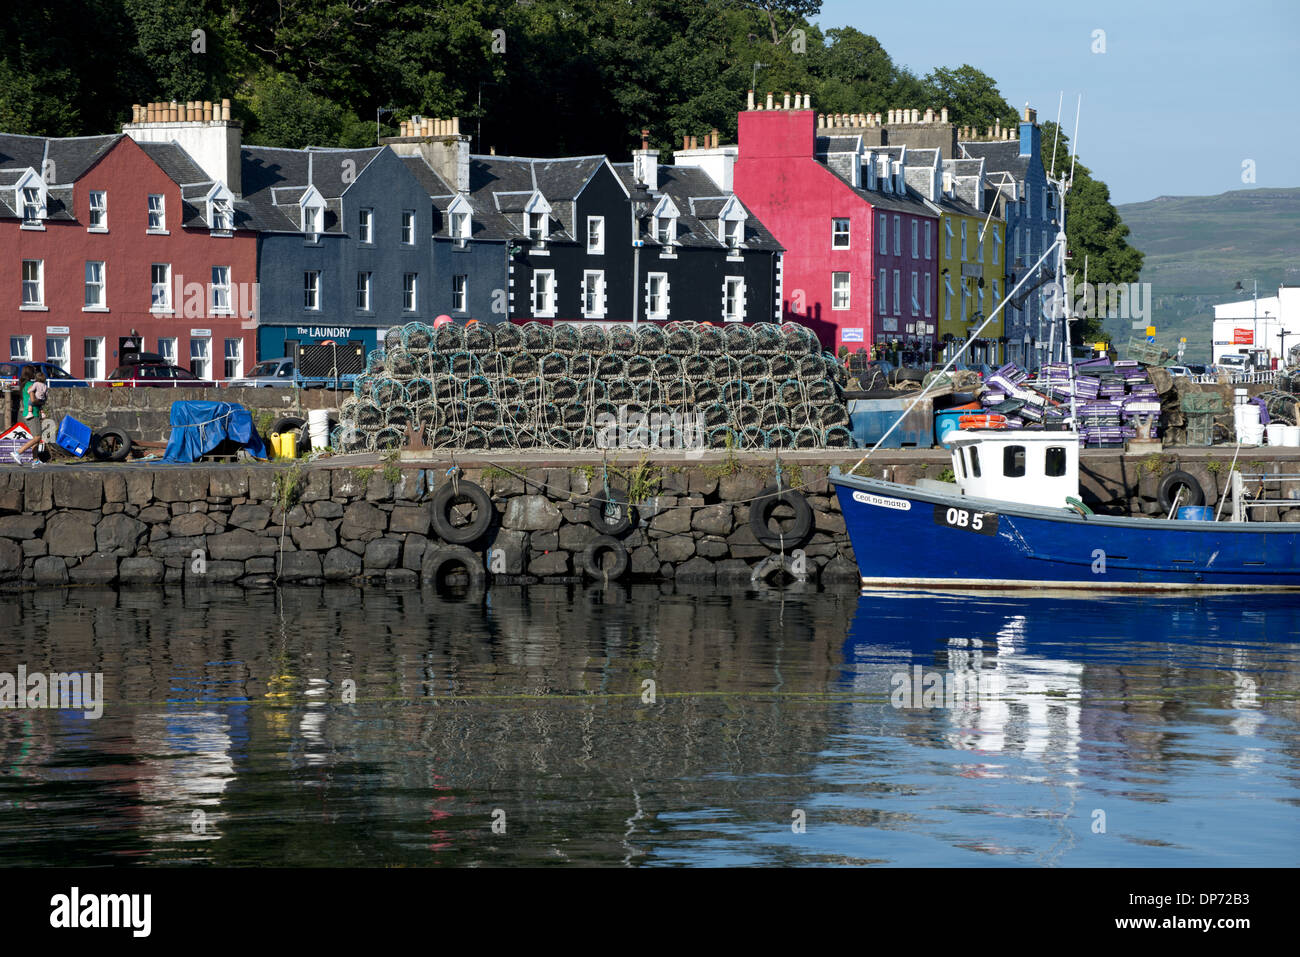 View of lobster pots and fishing boat at harbour of coastal town, Tobermory, Isle of Mull, Inner Hebrides, Scotland, July Stock Photo